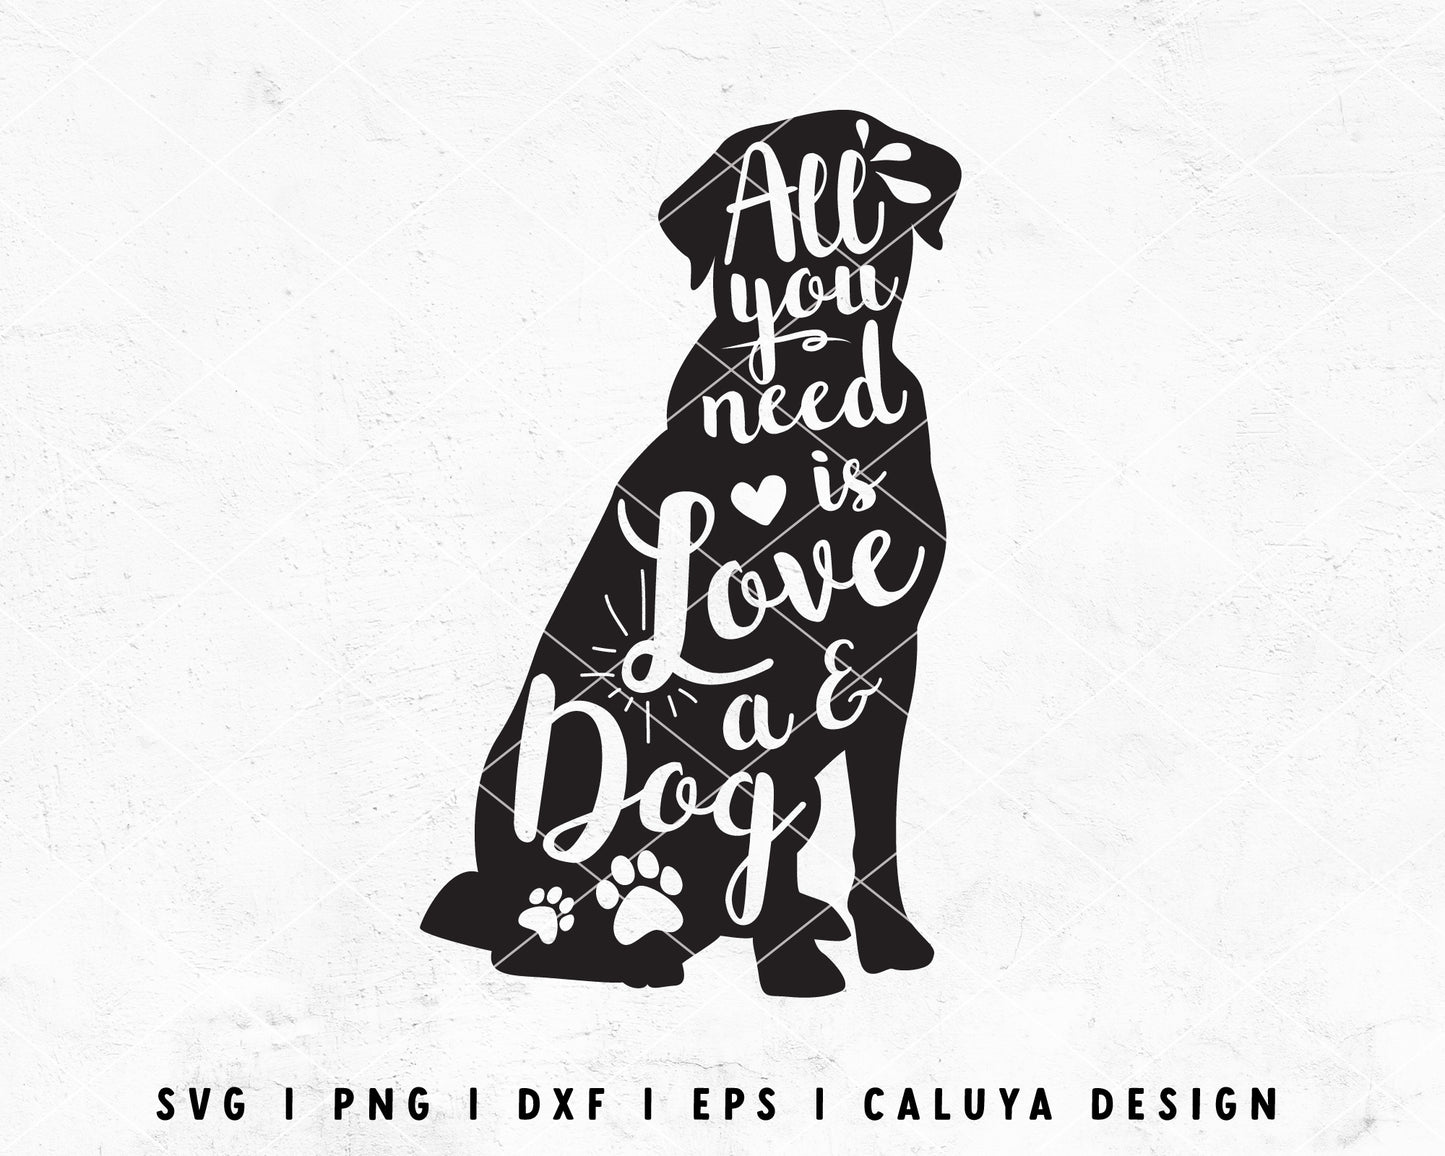 FREE Dog Lover SVG | Dog Quote SVG Cut File for Cricut, Cameo Silhouette | Free SVG Cut File